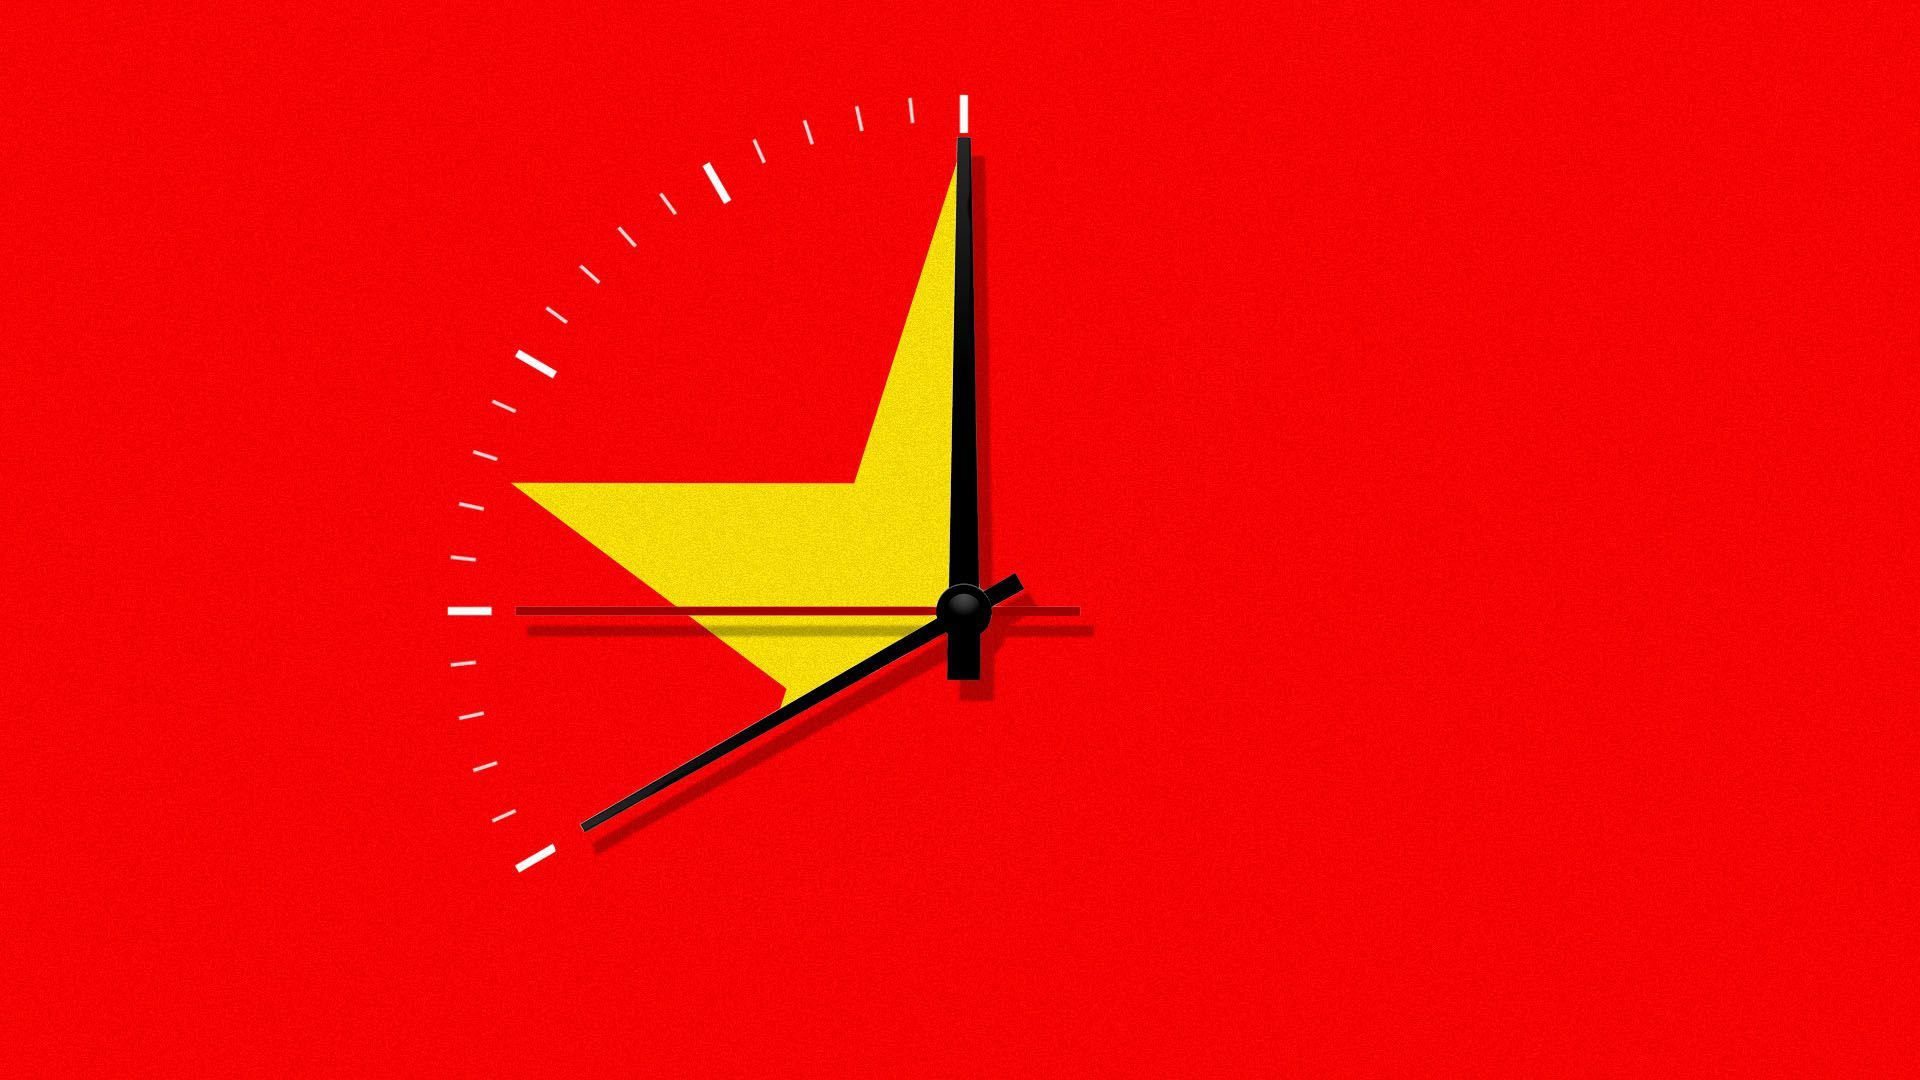 Chinese flag as a clock face.